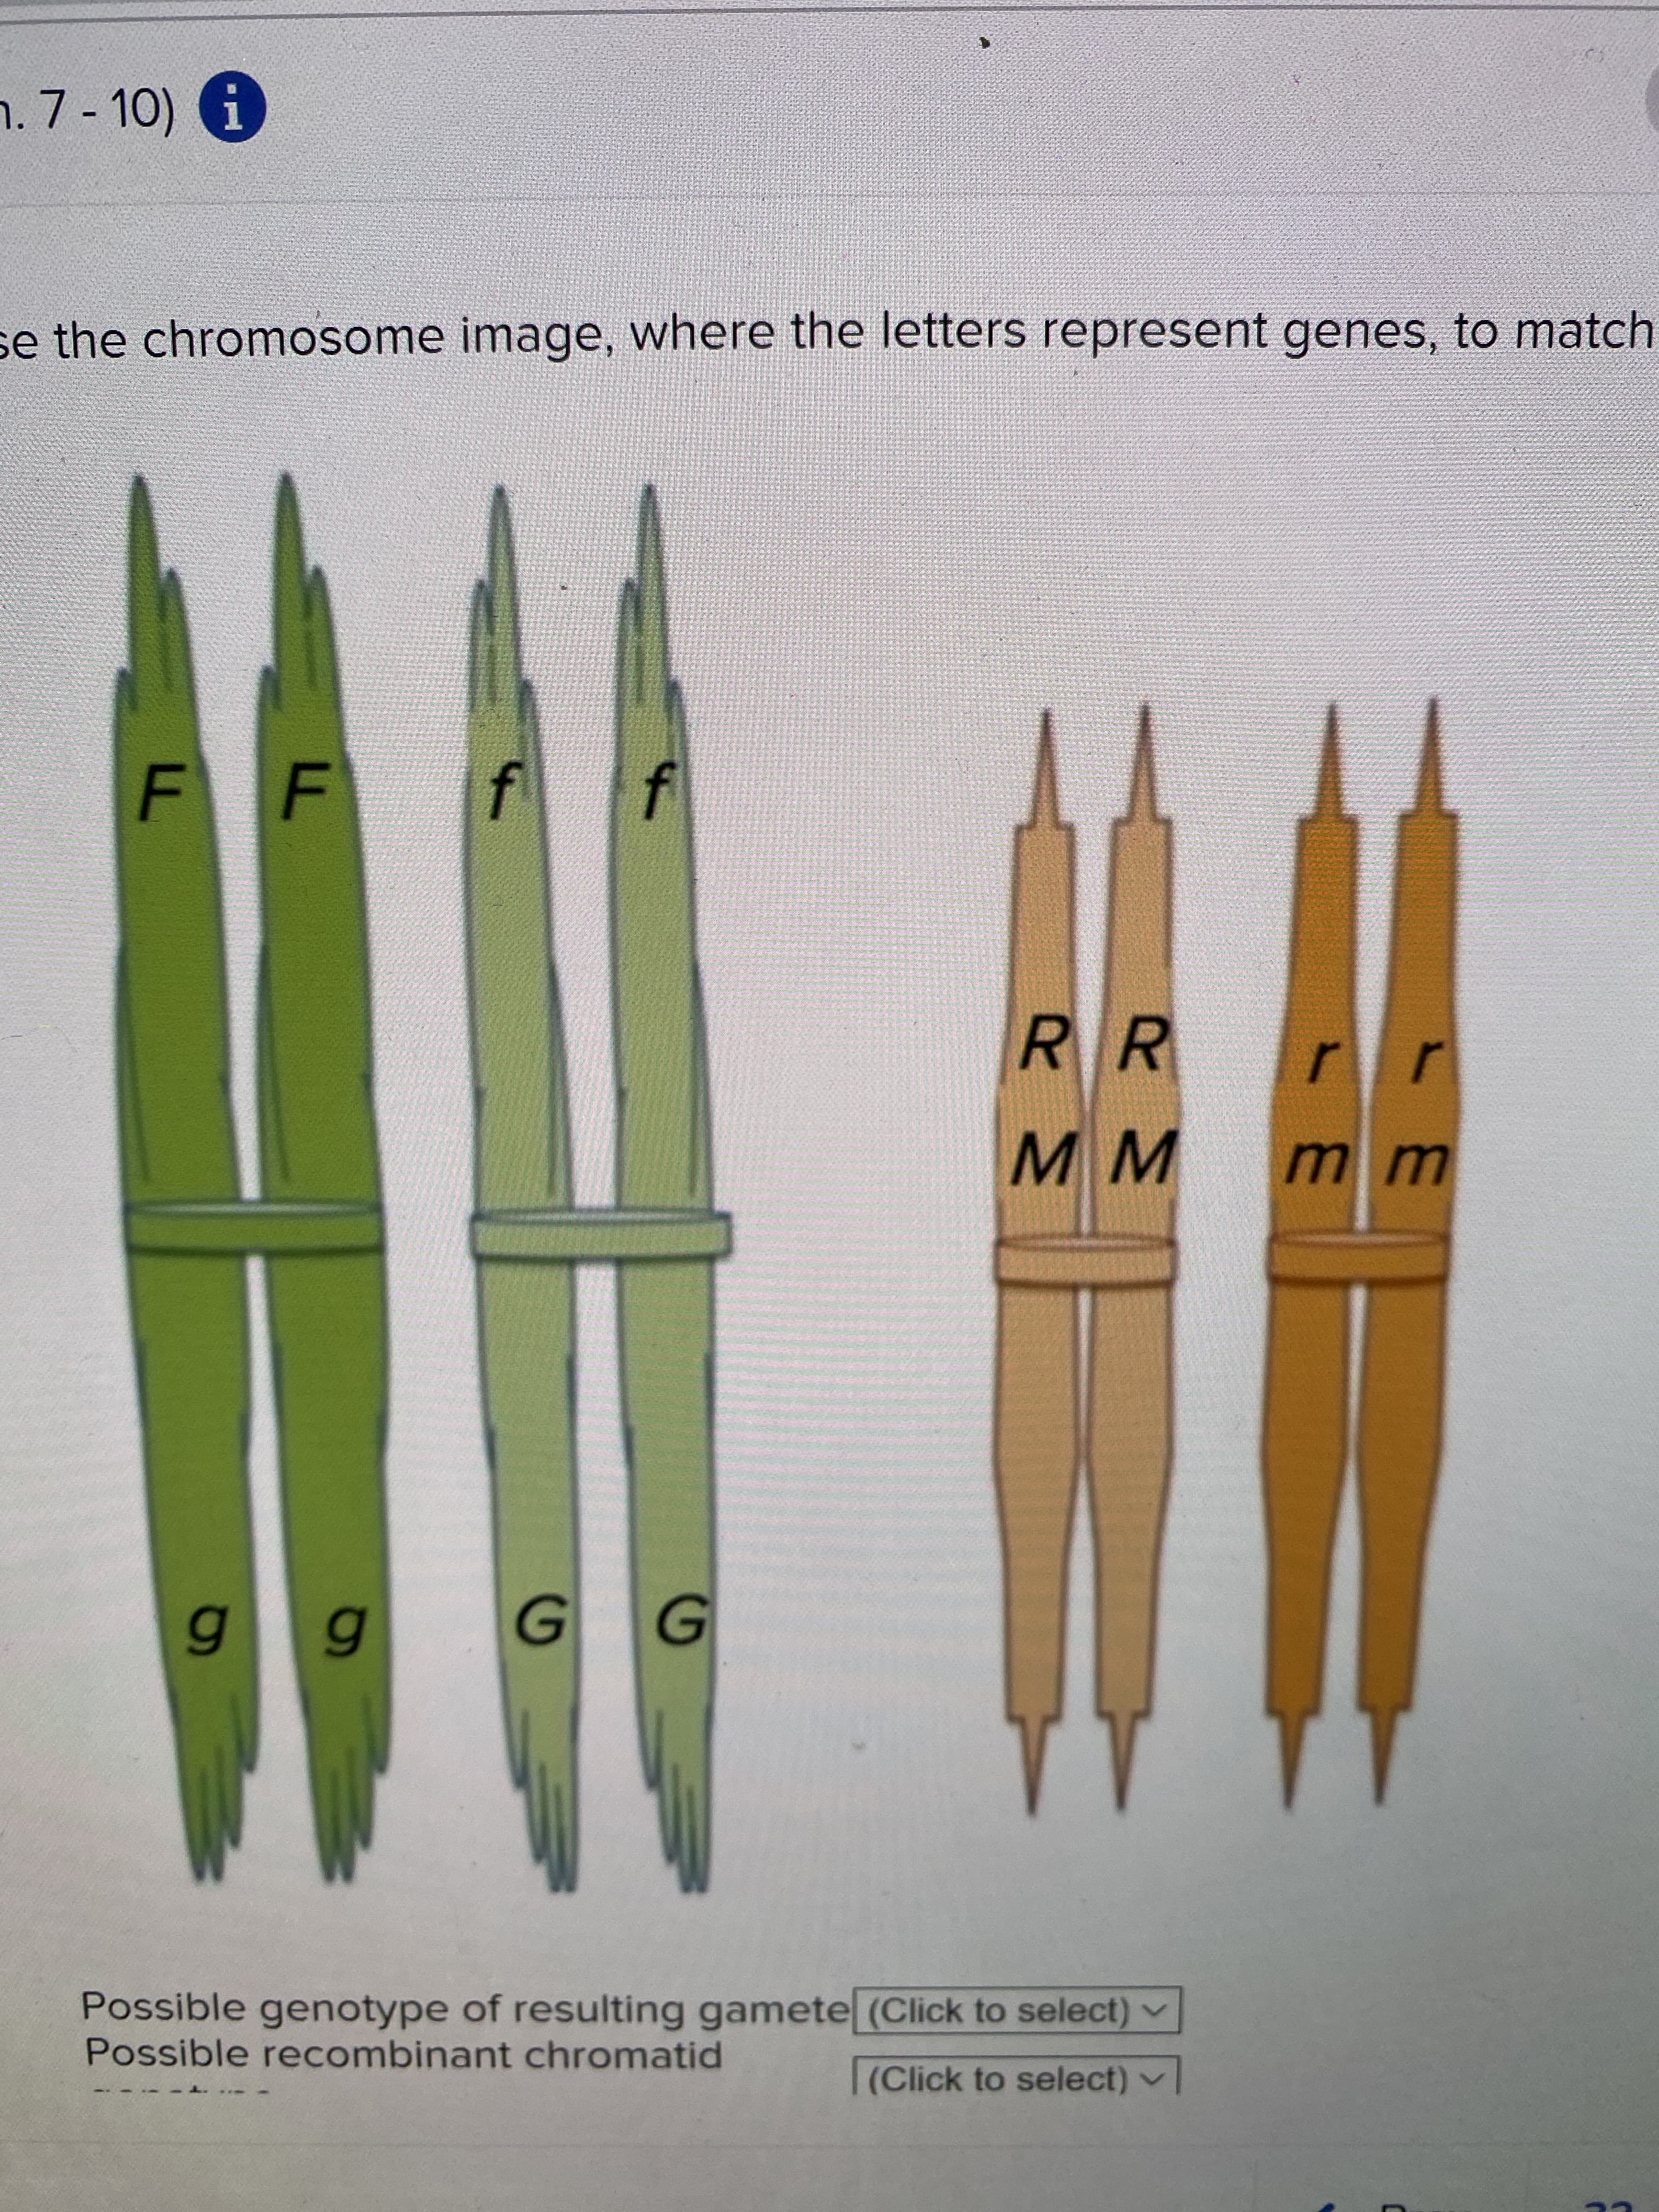 f.
n. 7-10) i
se the chromosome image, where the letters represent genes, to match
FF
RR
m
gg GG
Possible genotype of resulting gamete (Click to select) v
Possible recombinant chromatid
(Click to select) v
